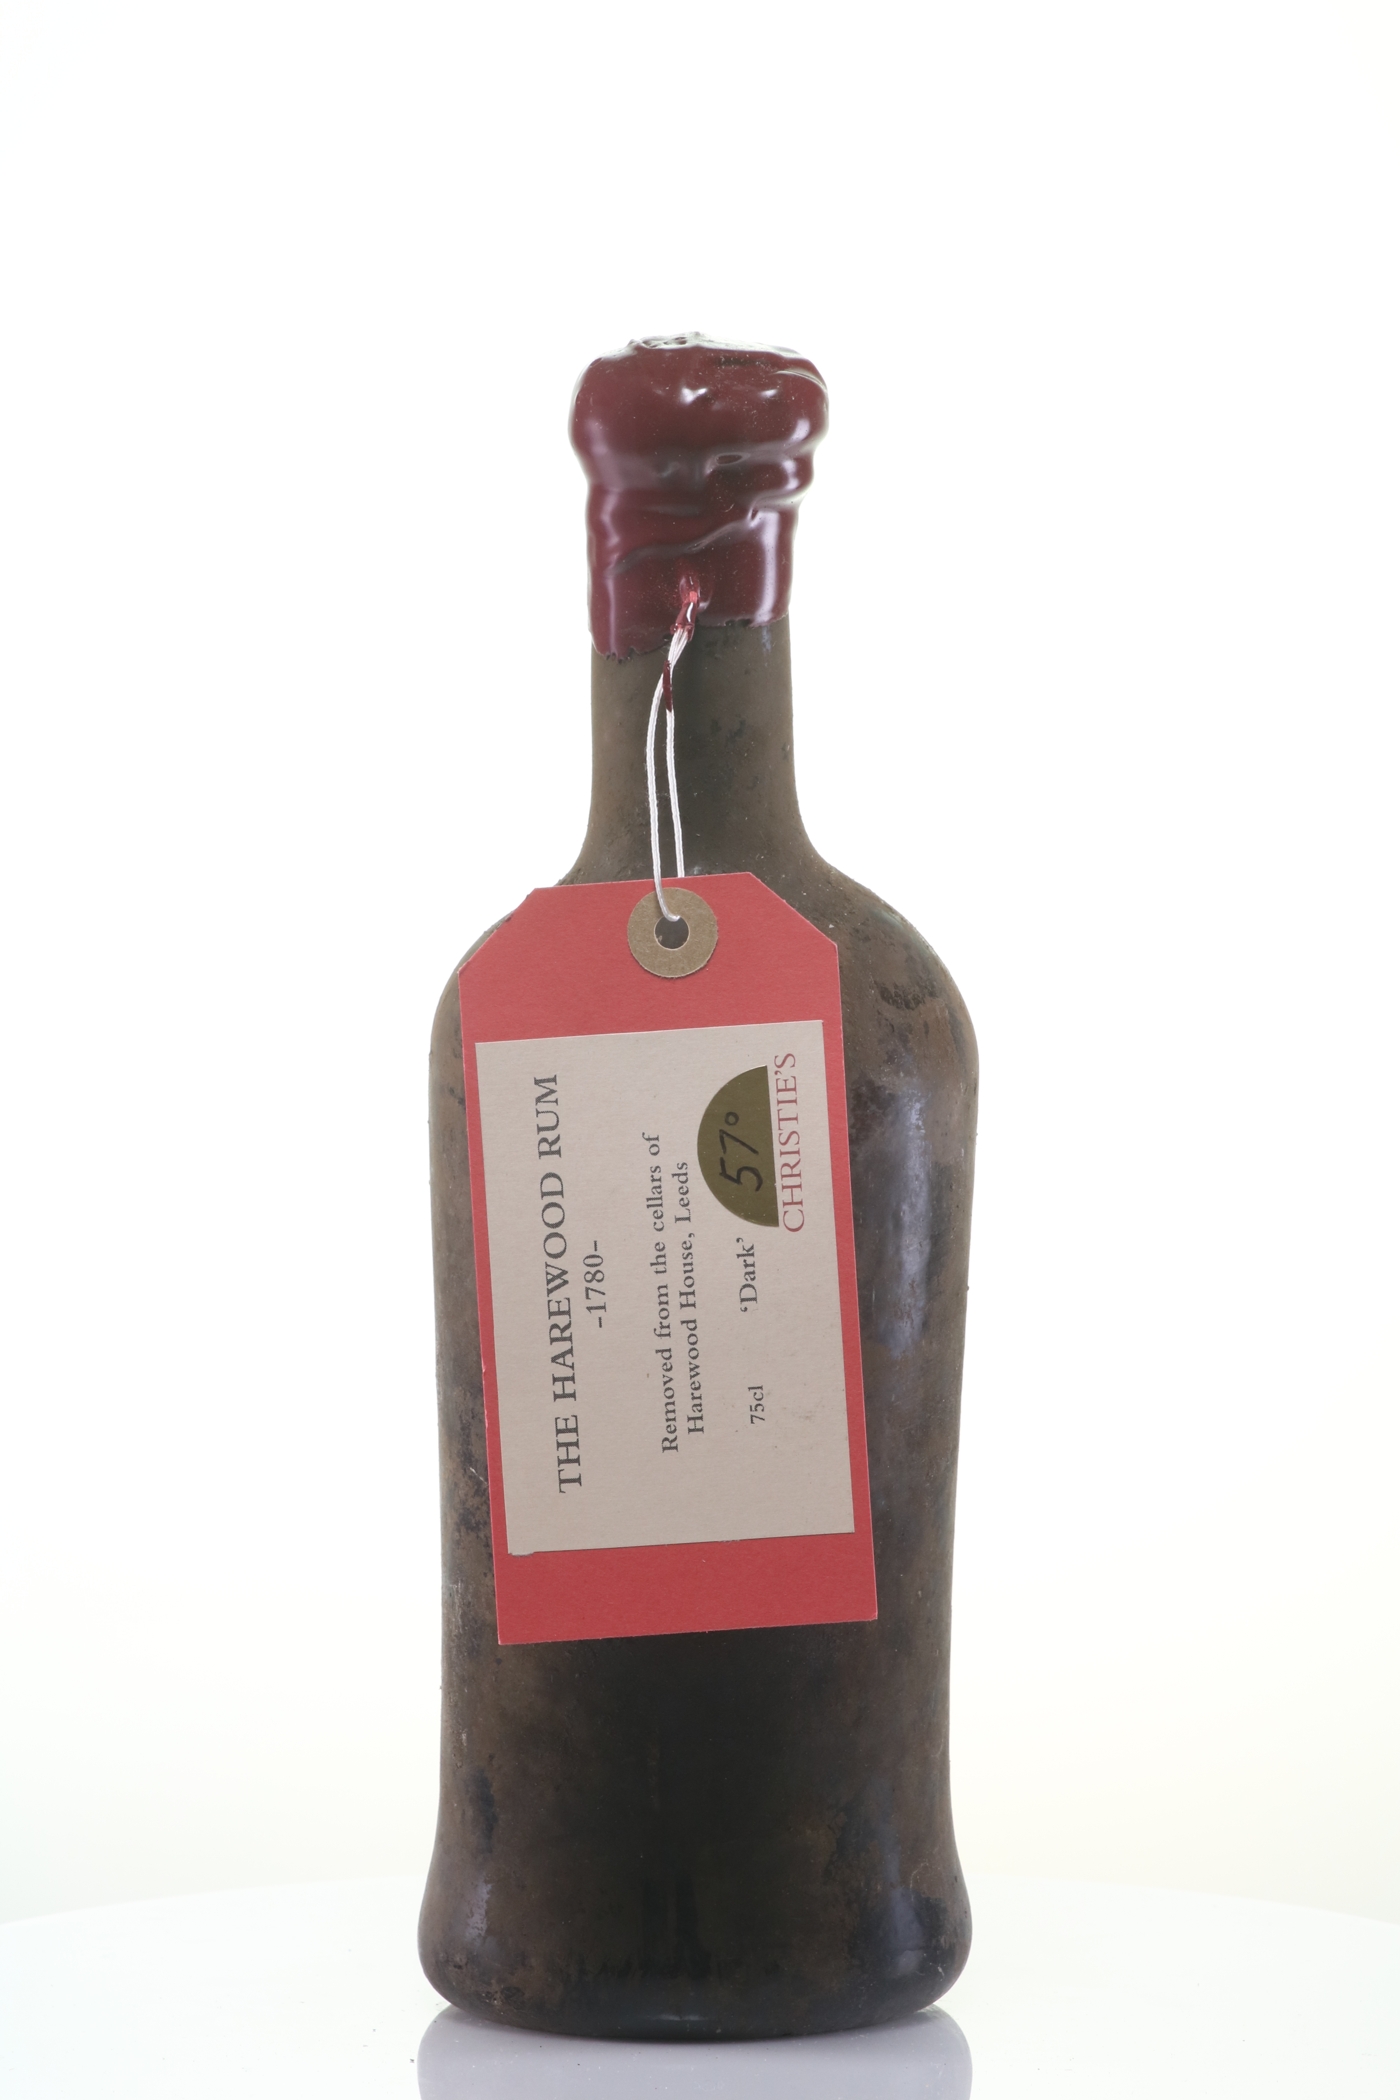 Miami Company Makes World Record Sale of Harewood Barbados Rum from 1780 for $29,999